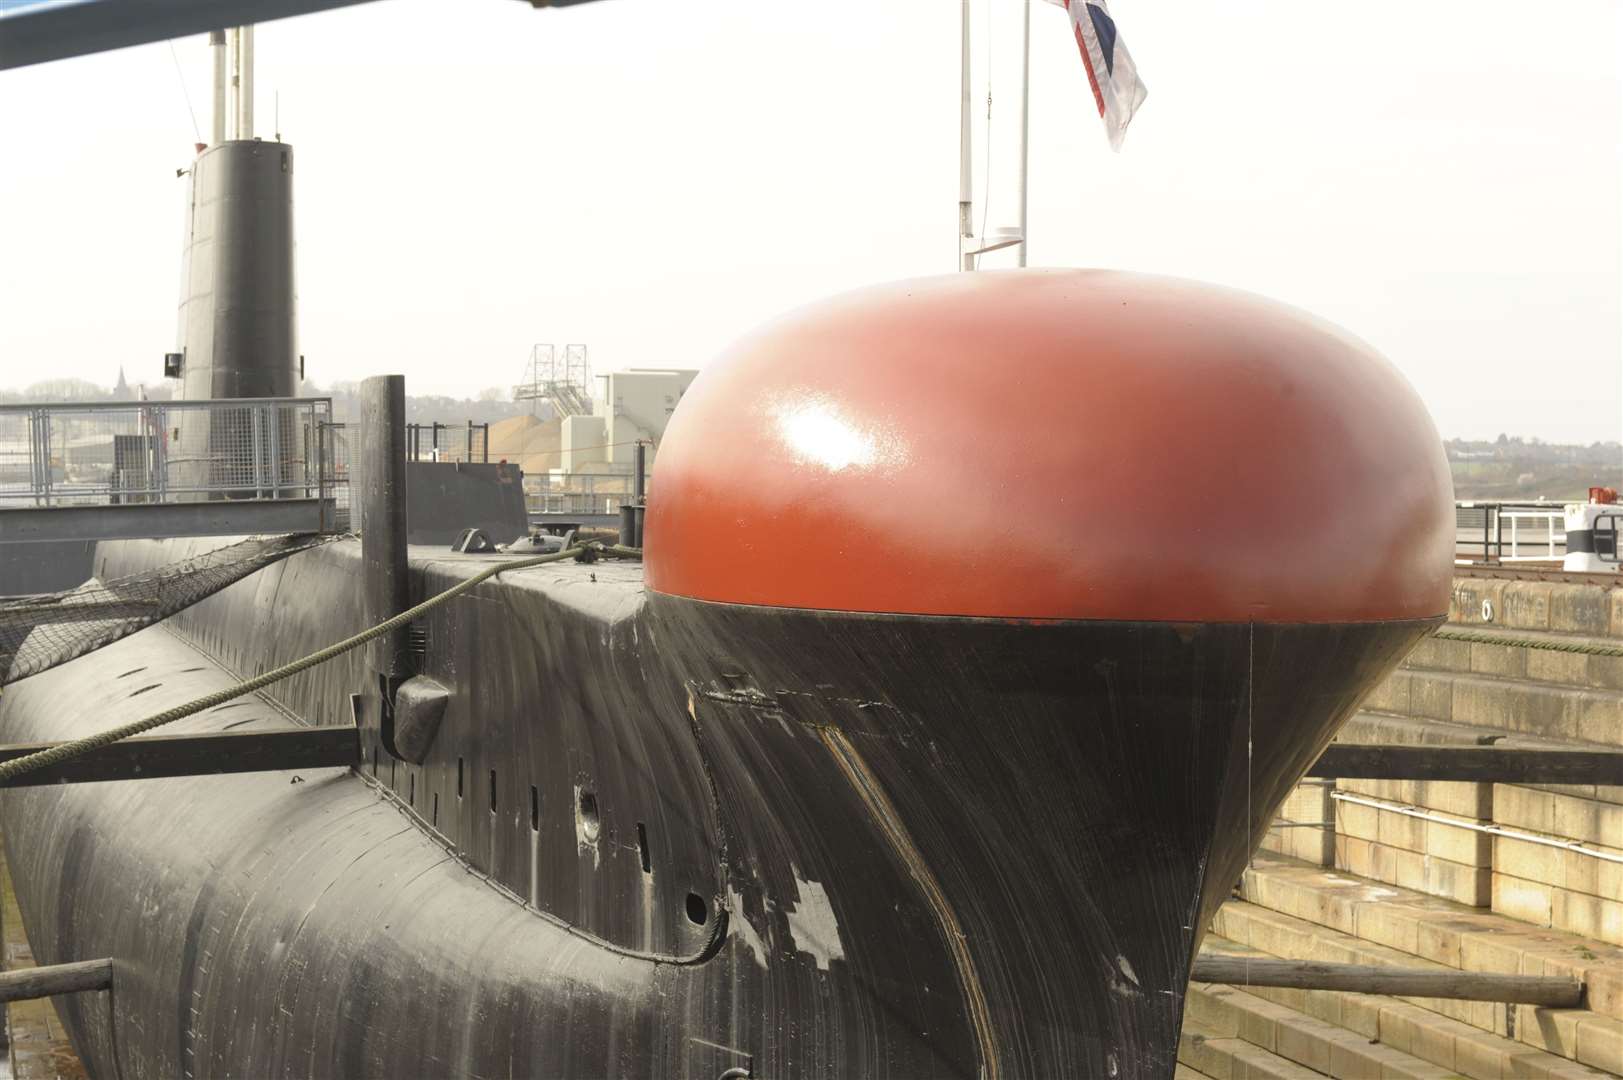 HMS Ocelot has had its nose painted for Comic Relief in 2015